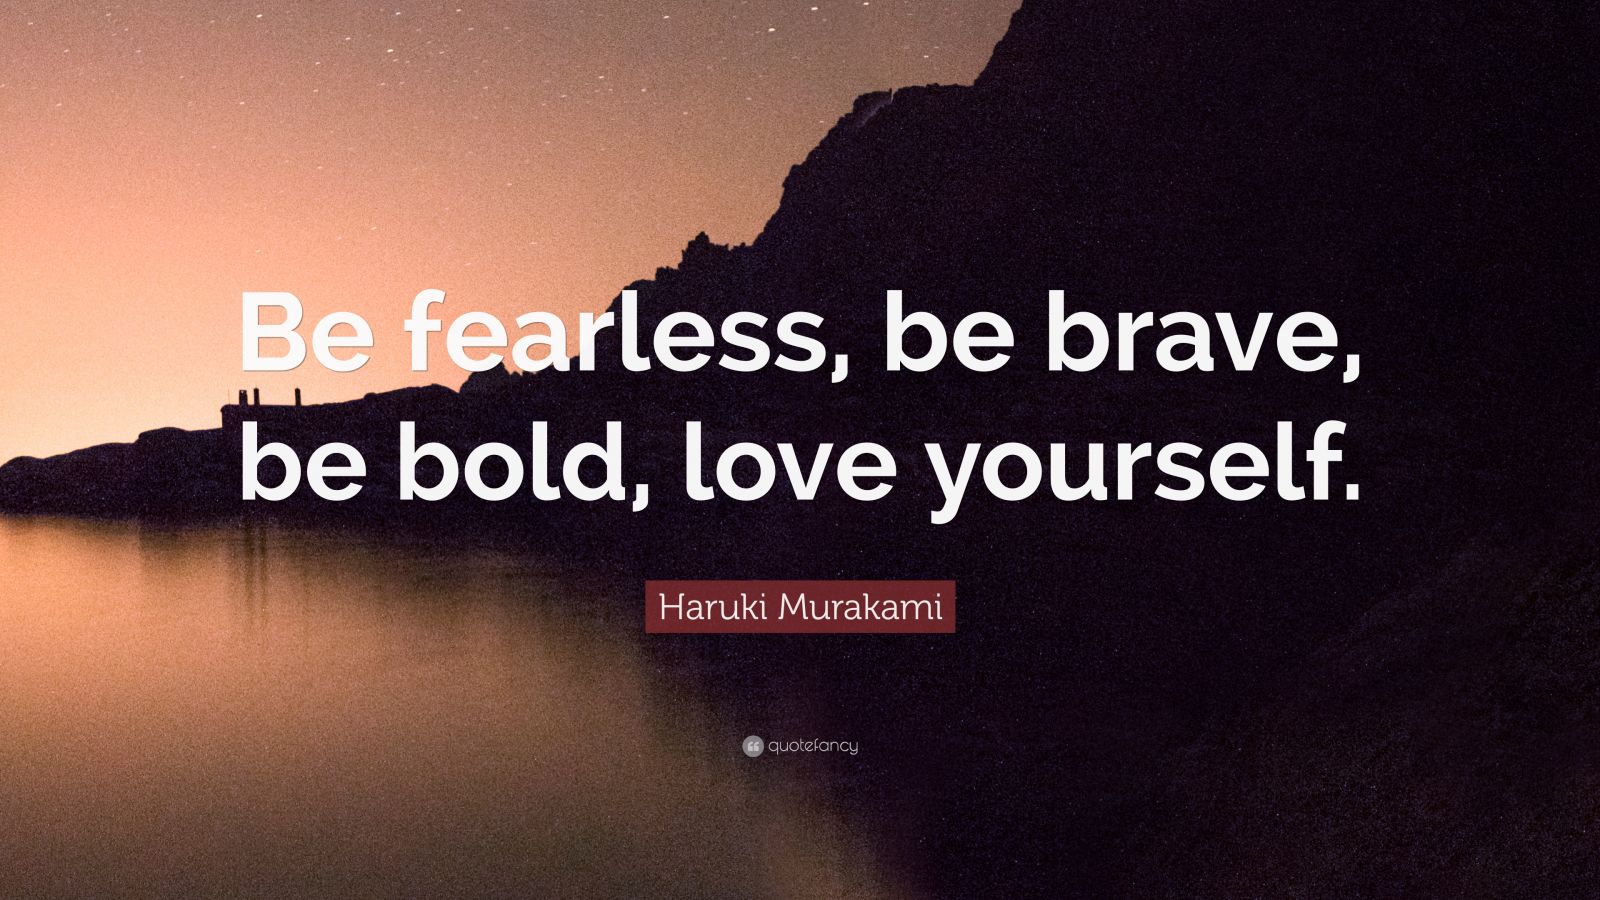 "be fearless, be brave, be bold, love yourself.